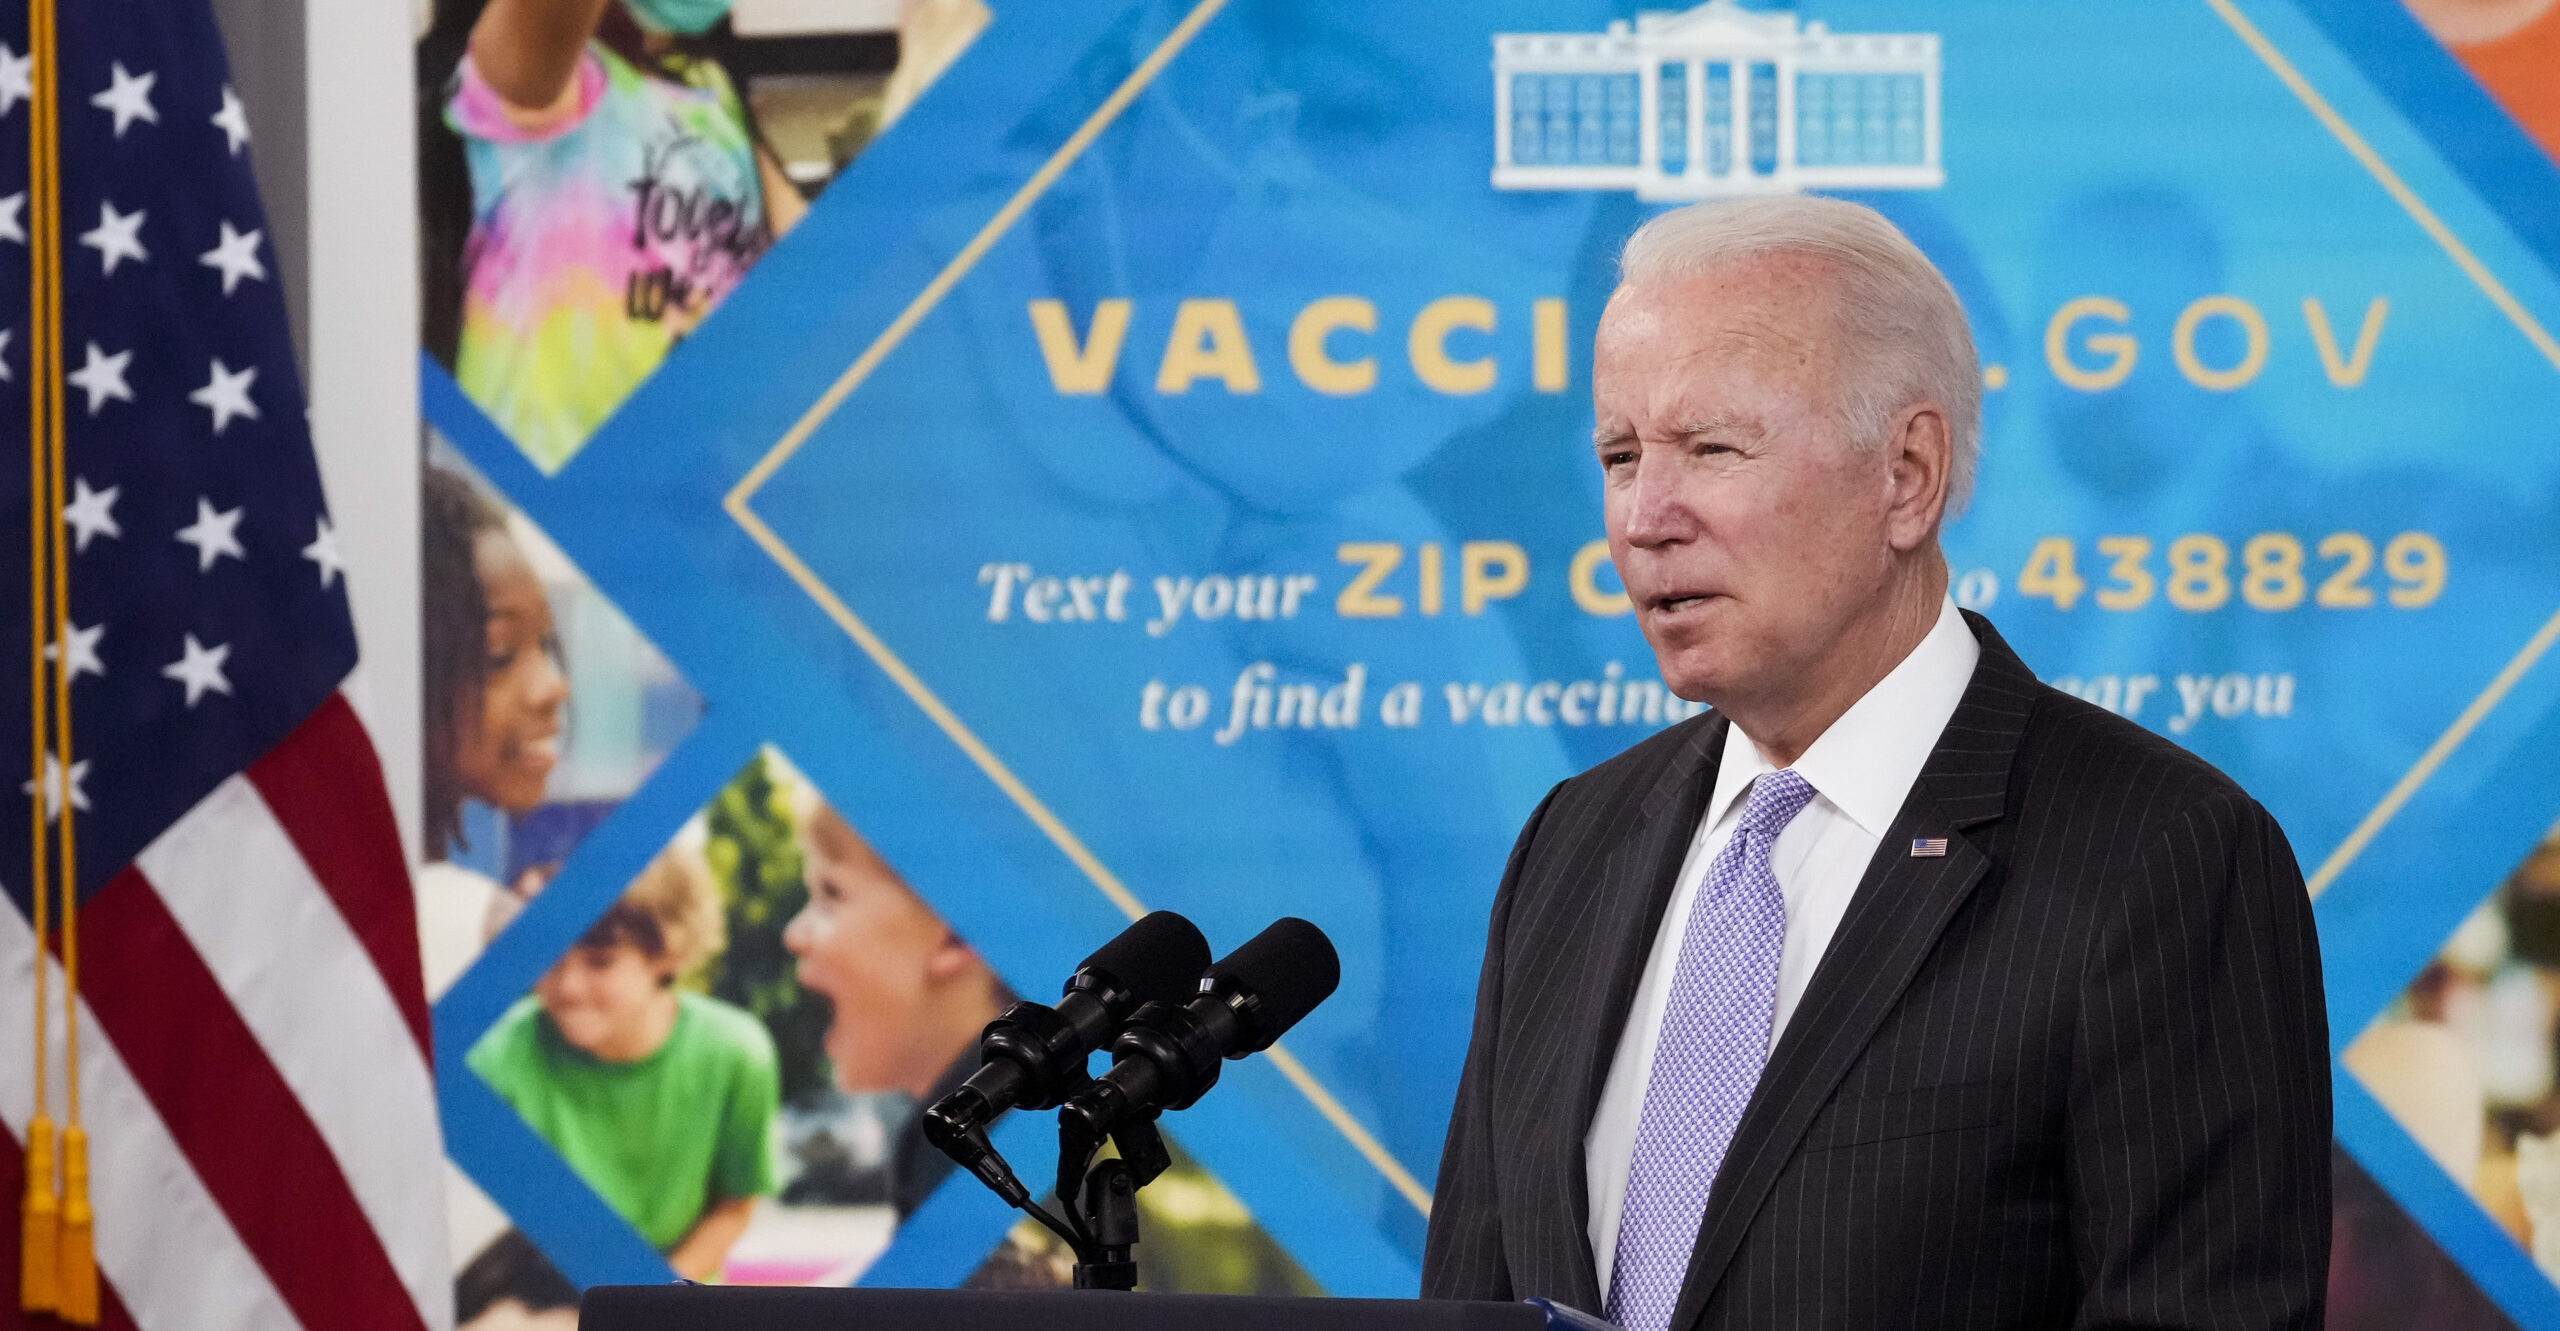 Heritage Foundation Sues Biden Administration to Stop Vaccine Mandate